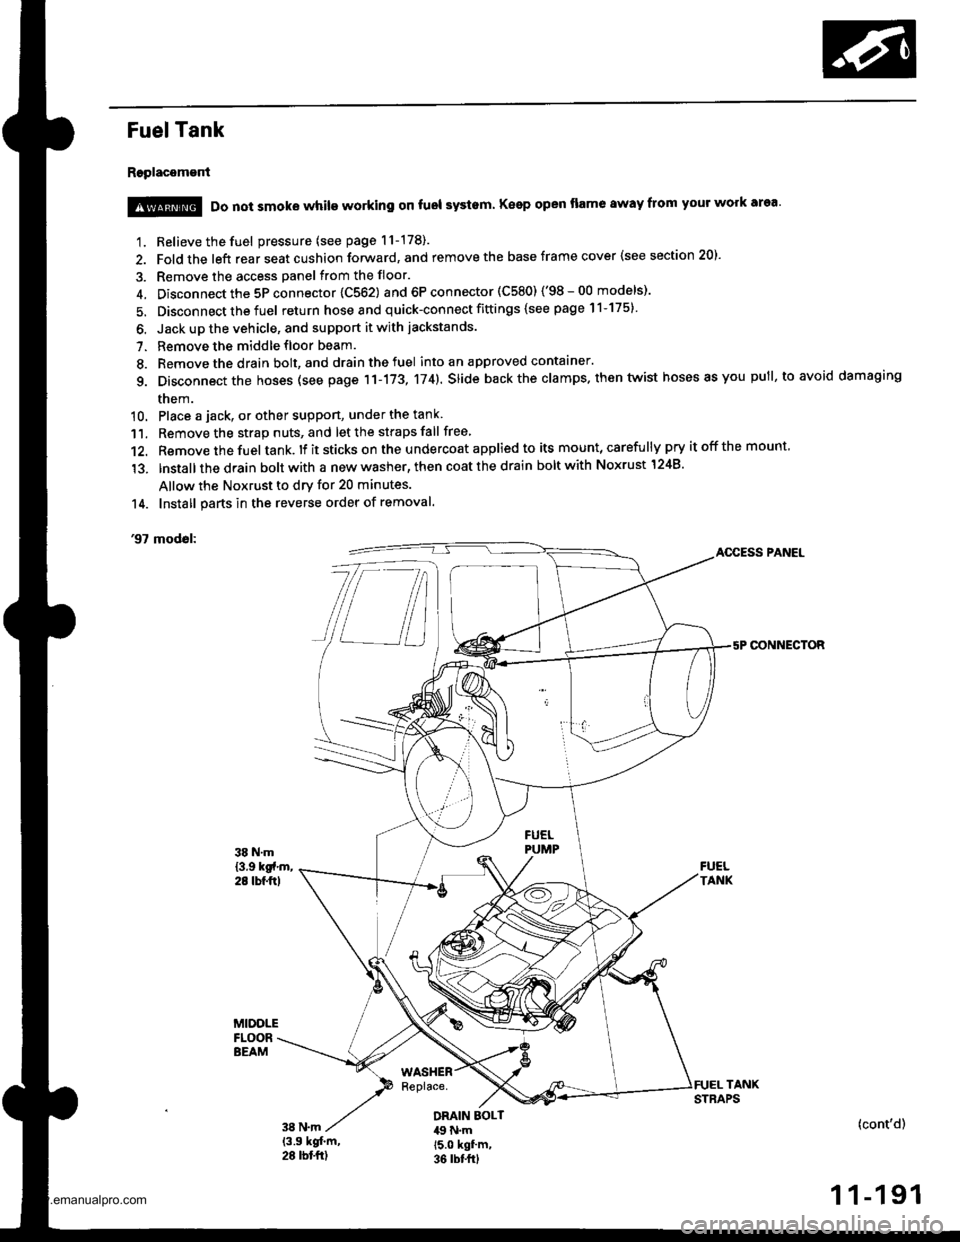 HONDA CR-V 1999 RD1-RD3 / 1.G Workshop Manual 
Fuel Tank
Replacement
1. Relieve the fuel pressure (see page 11-178).
2. Fold the left rear seat cushion forward, and remove the base frame cover {see section 20).
3. Remove the access panel from the